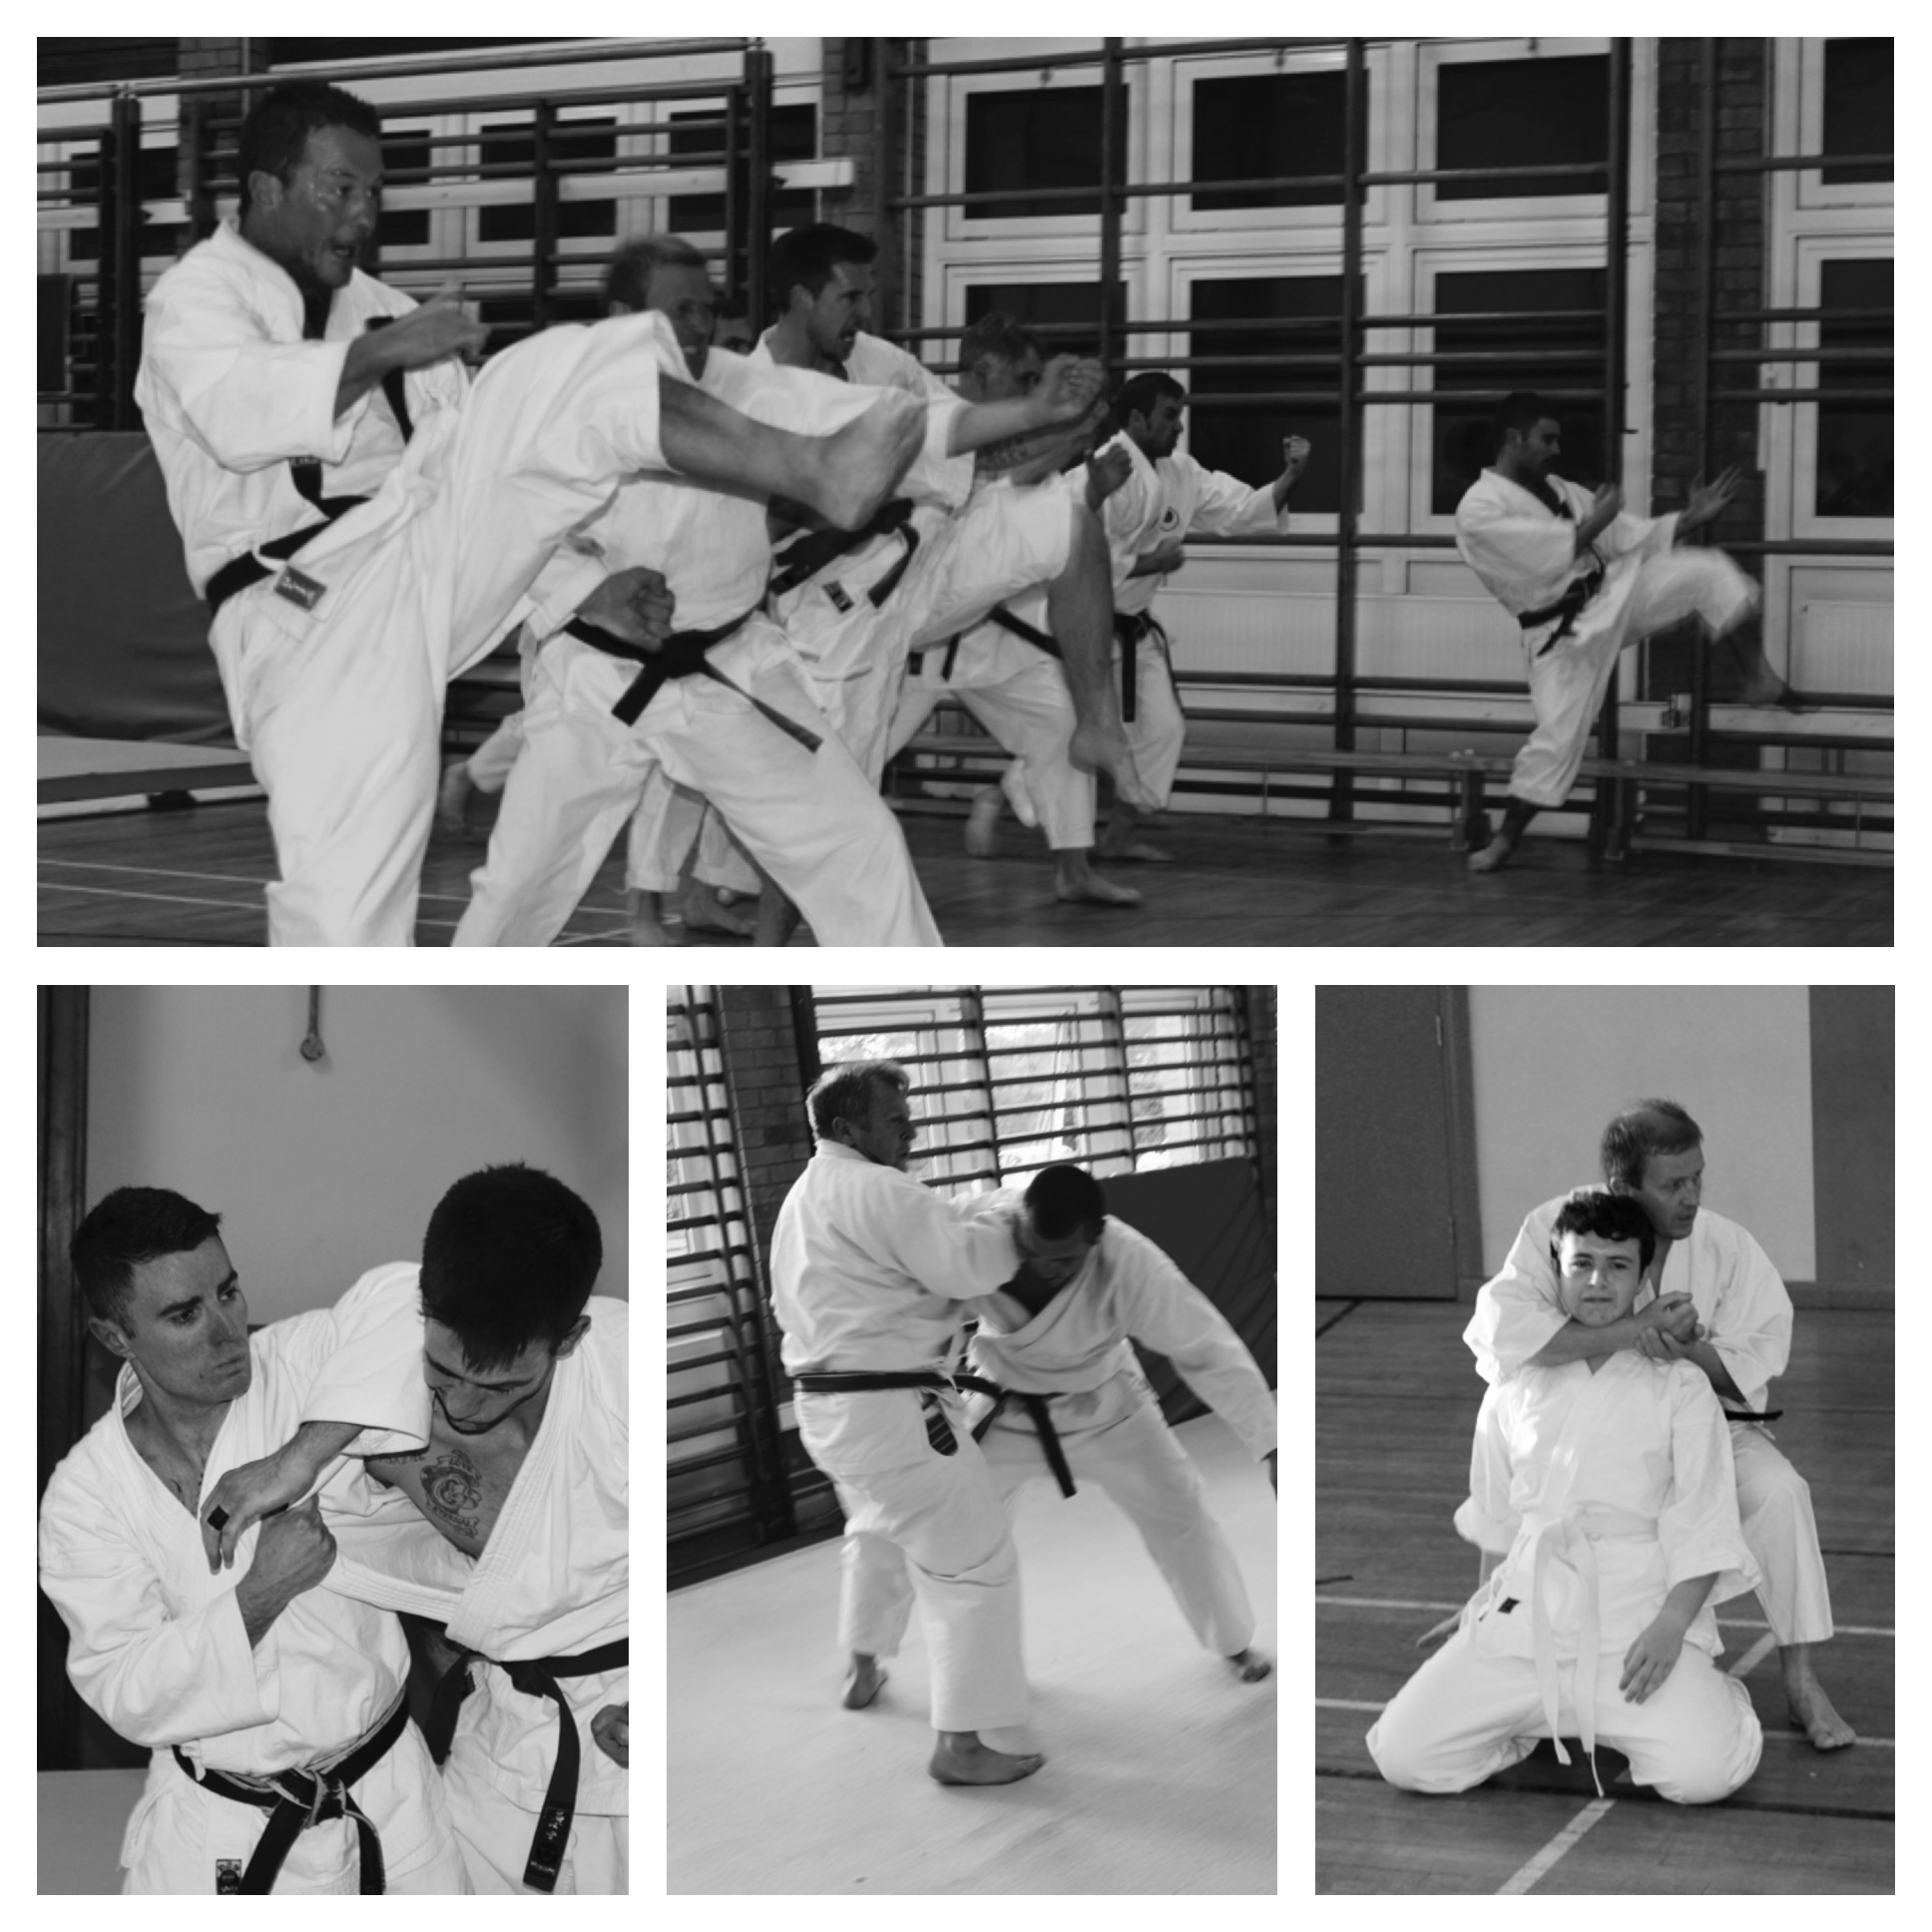 Shotokan Training with different techniques including Elbow Strikes and Front Kicks